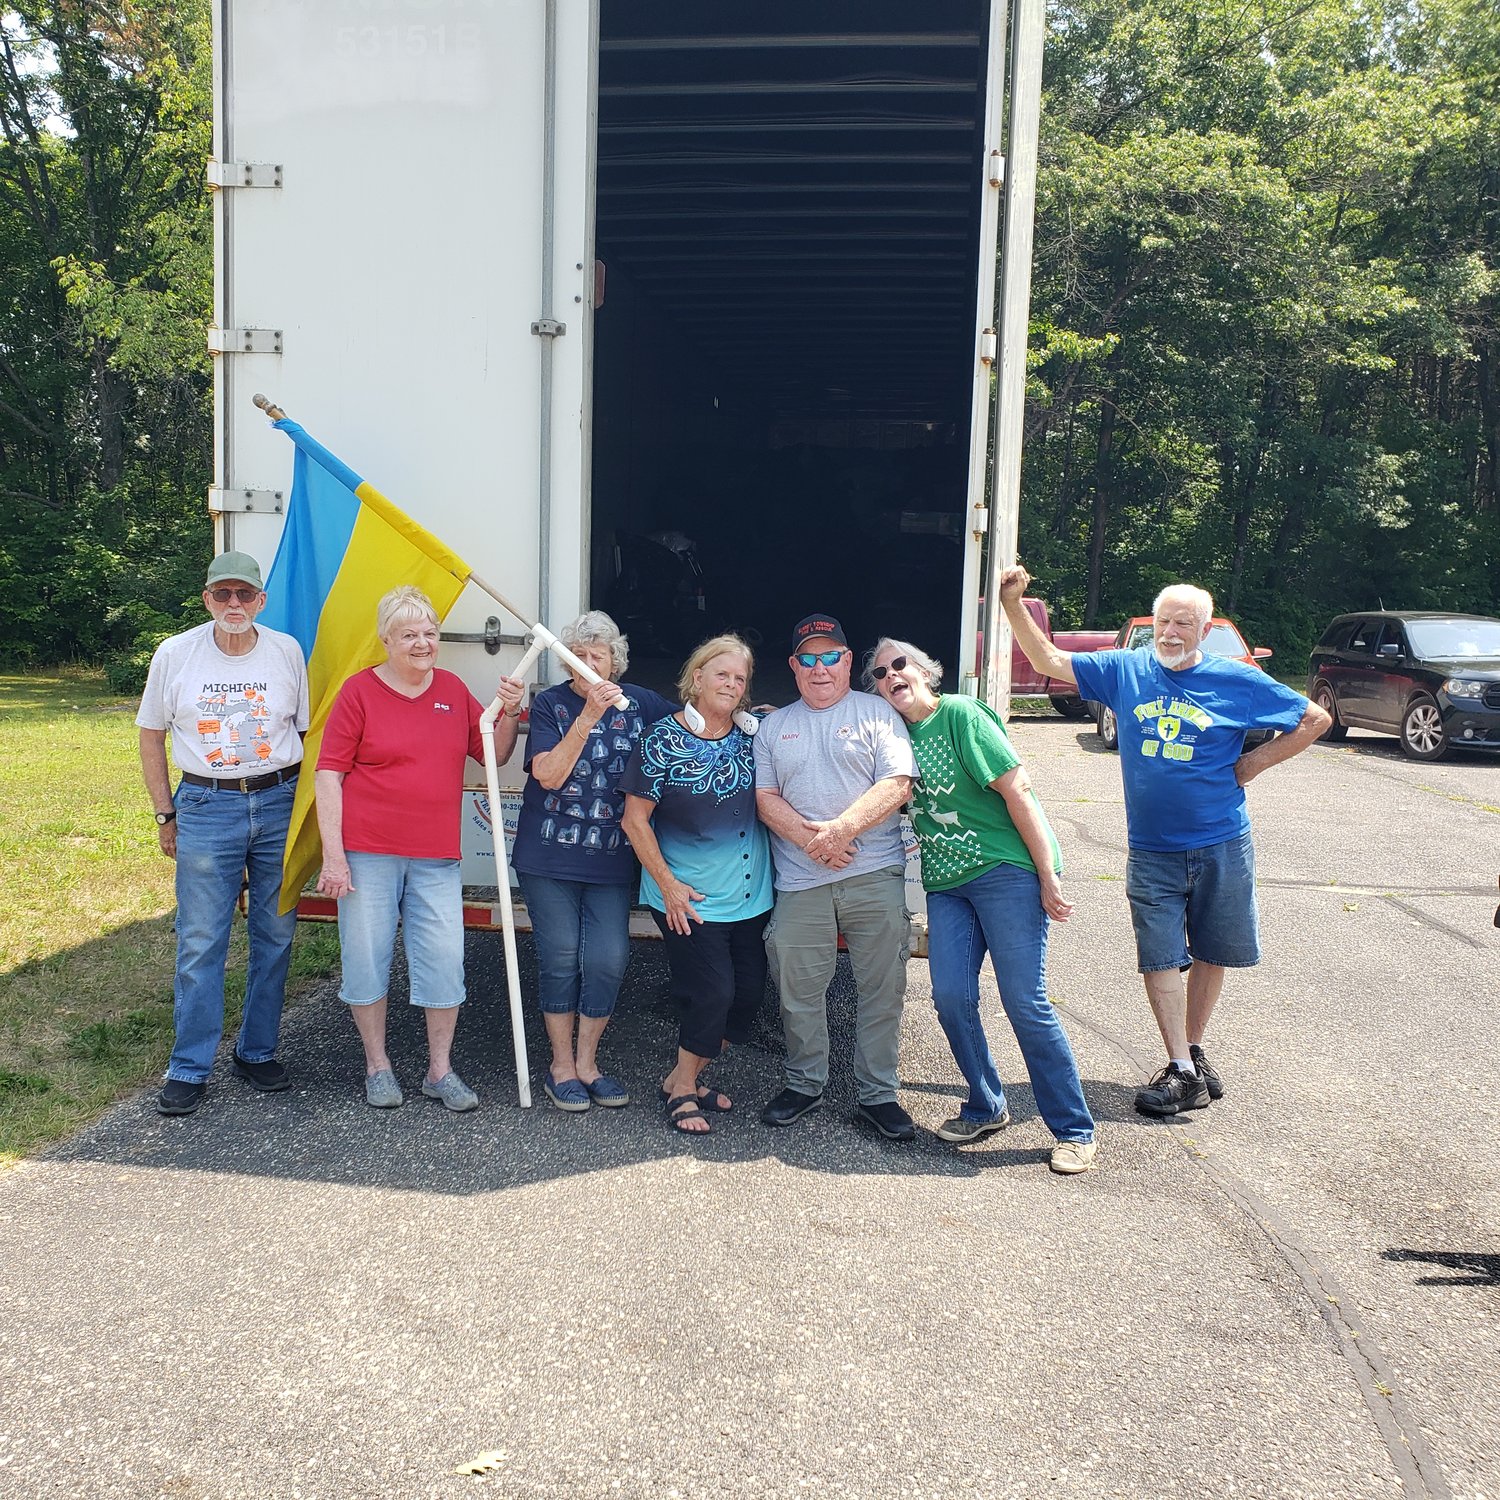 These photos provided by Tom Pirnstill show the vast outpouring of goodwill and compassion for the victims of the Russian invasion of Ukraine. The collaborative effort of Orphan Grain Train and Living Hope Lutheran Church of Farwell yielded more than four tons of materials and supplies much needed in Ukraine and in other countries supporting Ukrainian refugees.